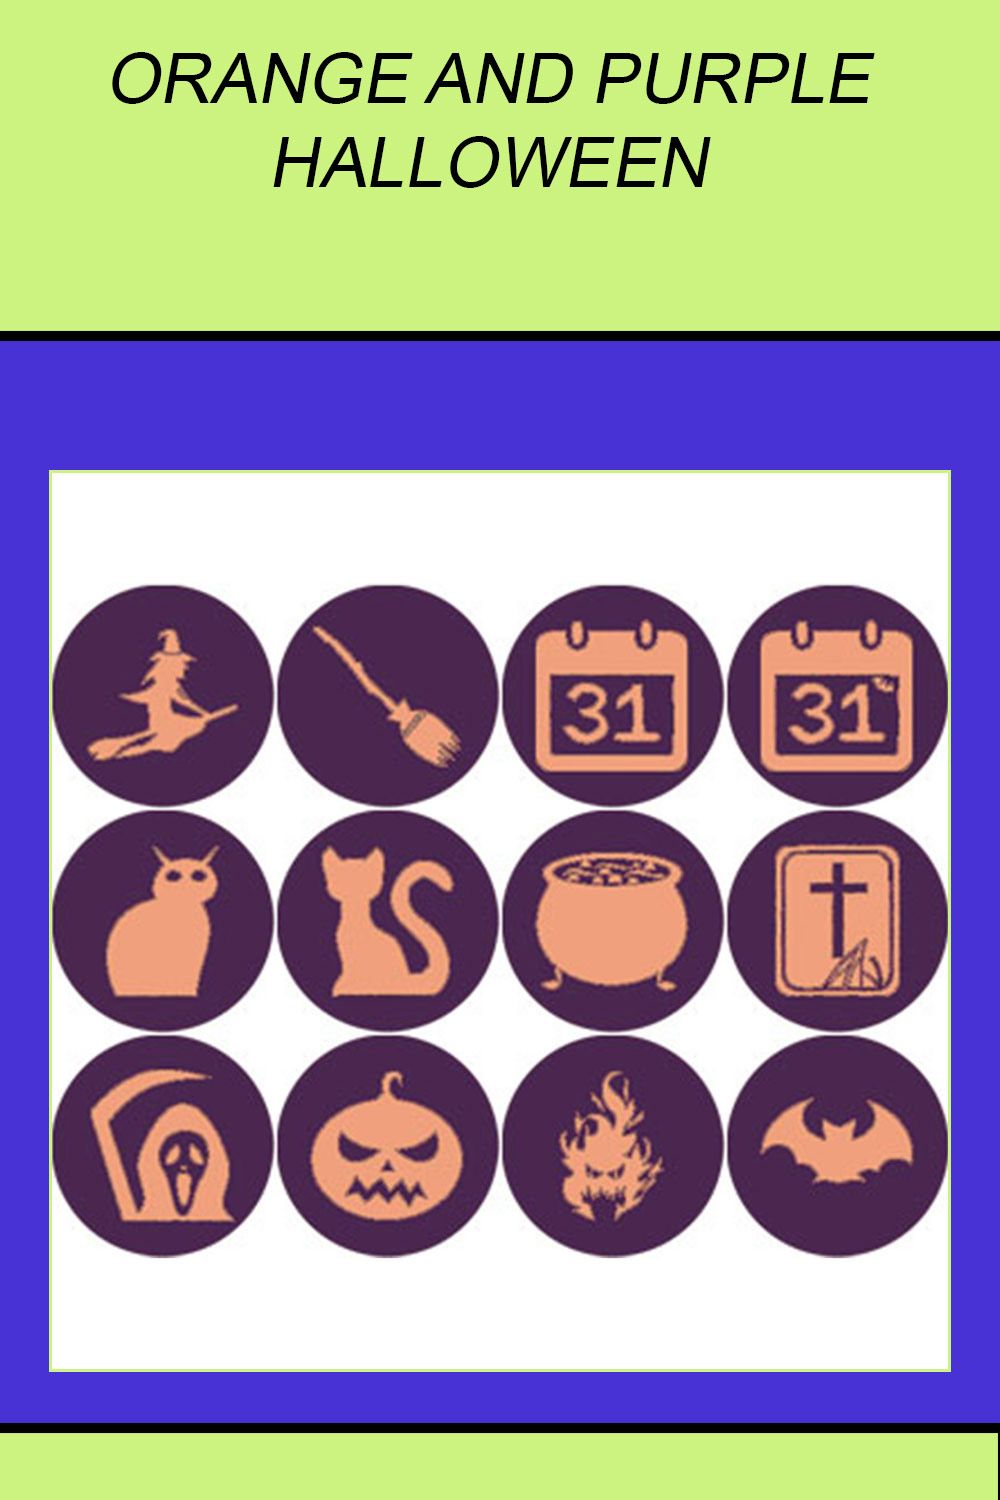 ORANGE AND PURPLE HALLOWEEN ROUND ICONS pinterest preview image.